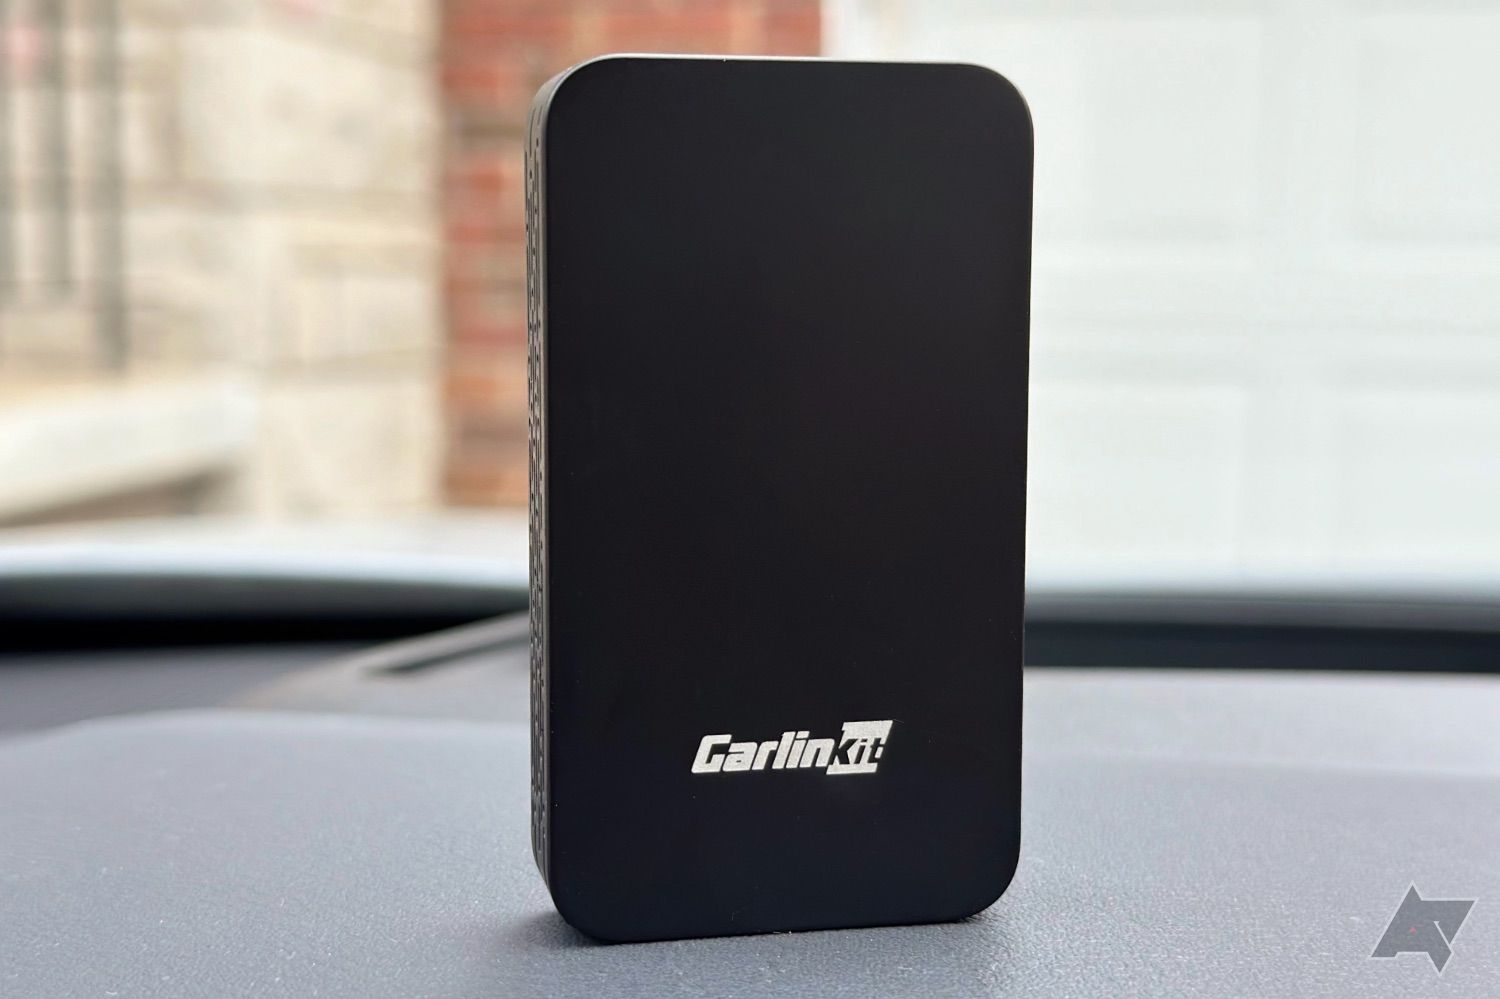 Carlinkit 5.0 review: Reliable wireless Android Auto with a catch